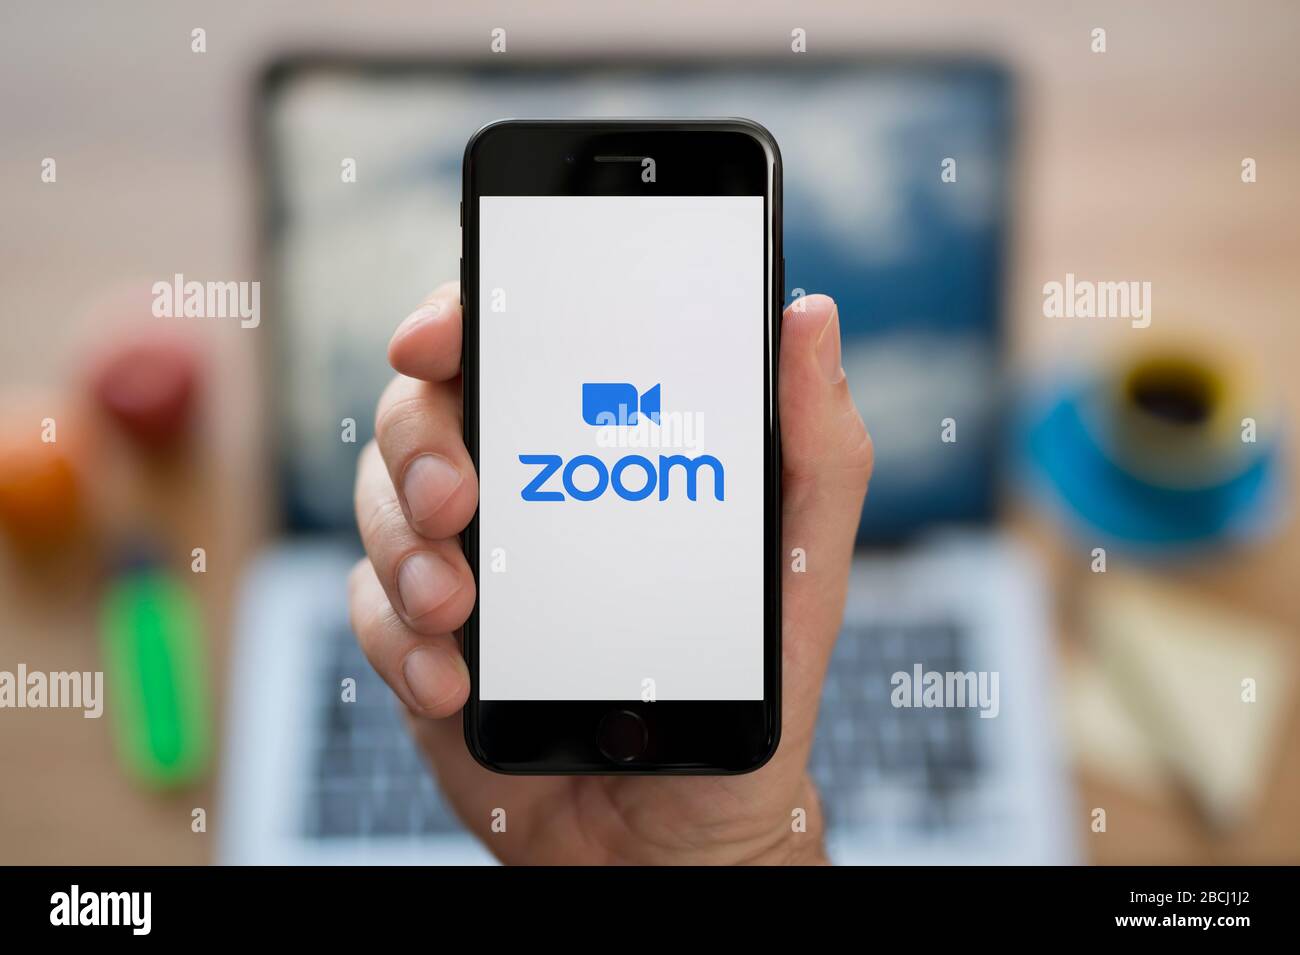 A man looks at his iPhone which displays the Zoom video conferencing logo (Editorial use only). Stock Photo